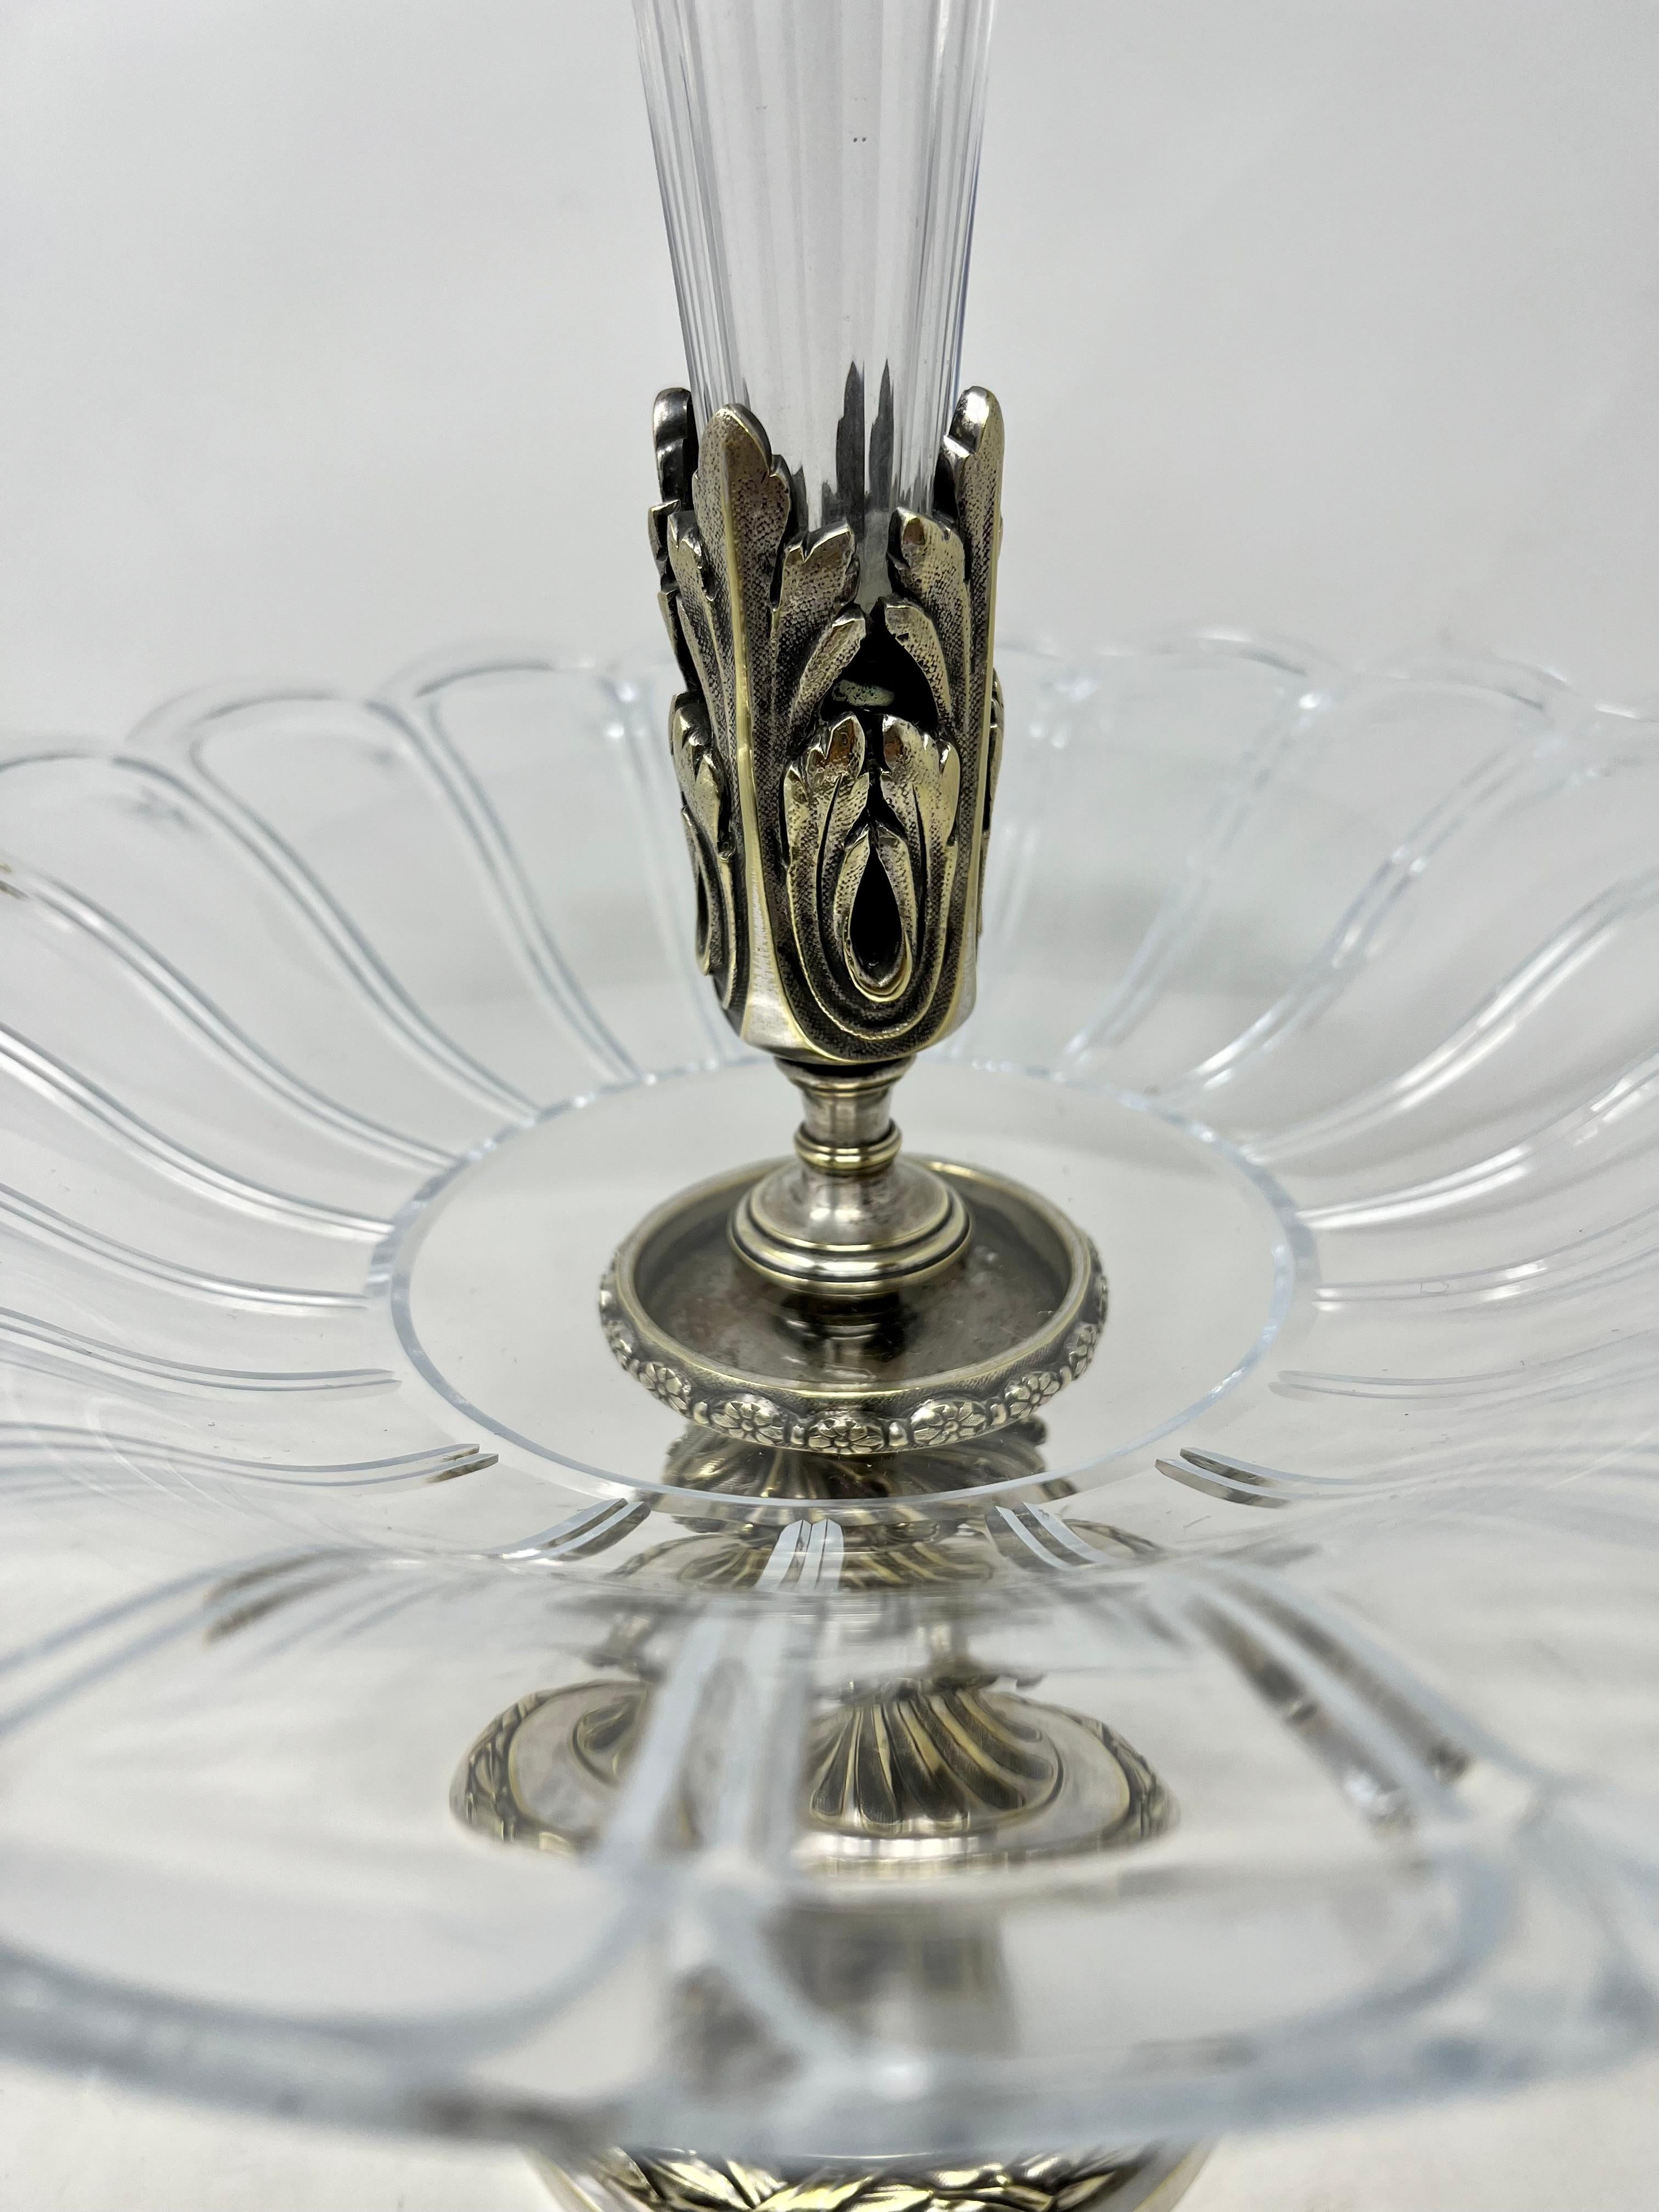 Antique French Silver on Bronze Baccarat Epergne circa 1865-75 In Good Condition For Sale In New Orleans, LA